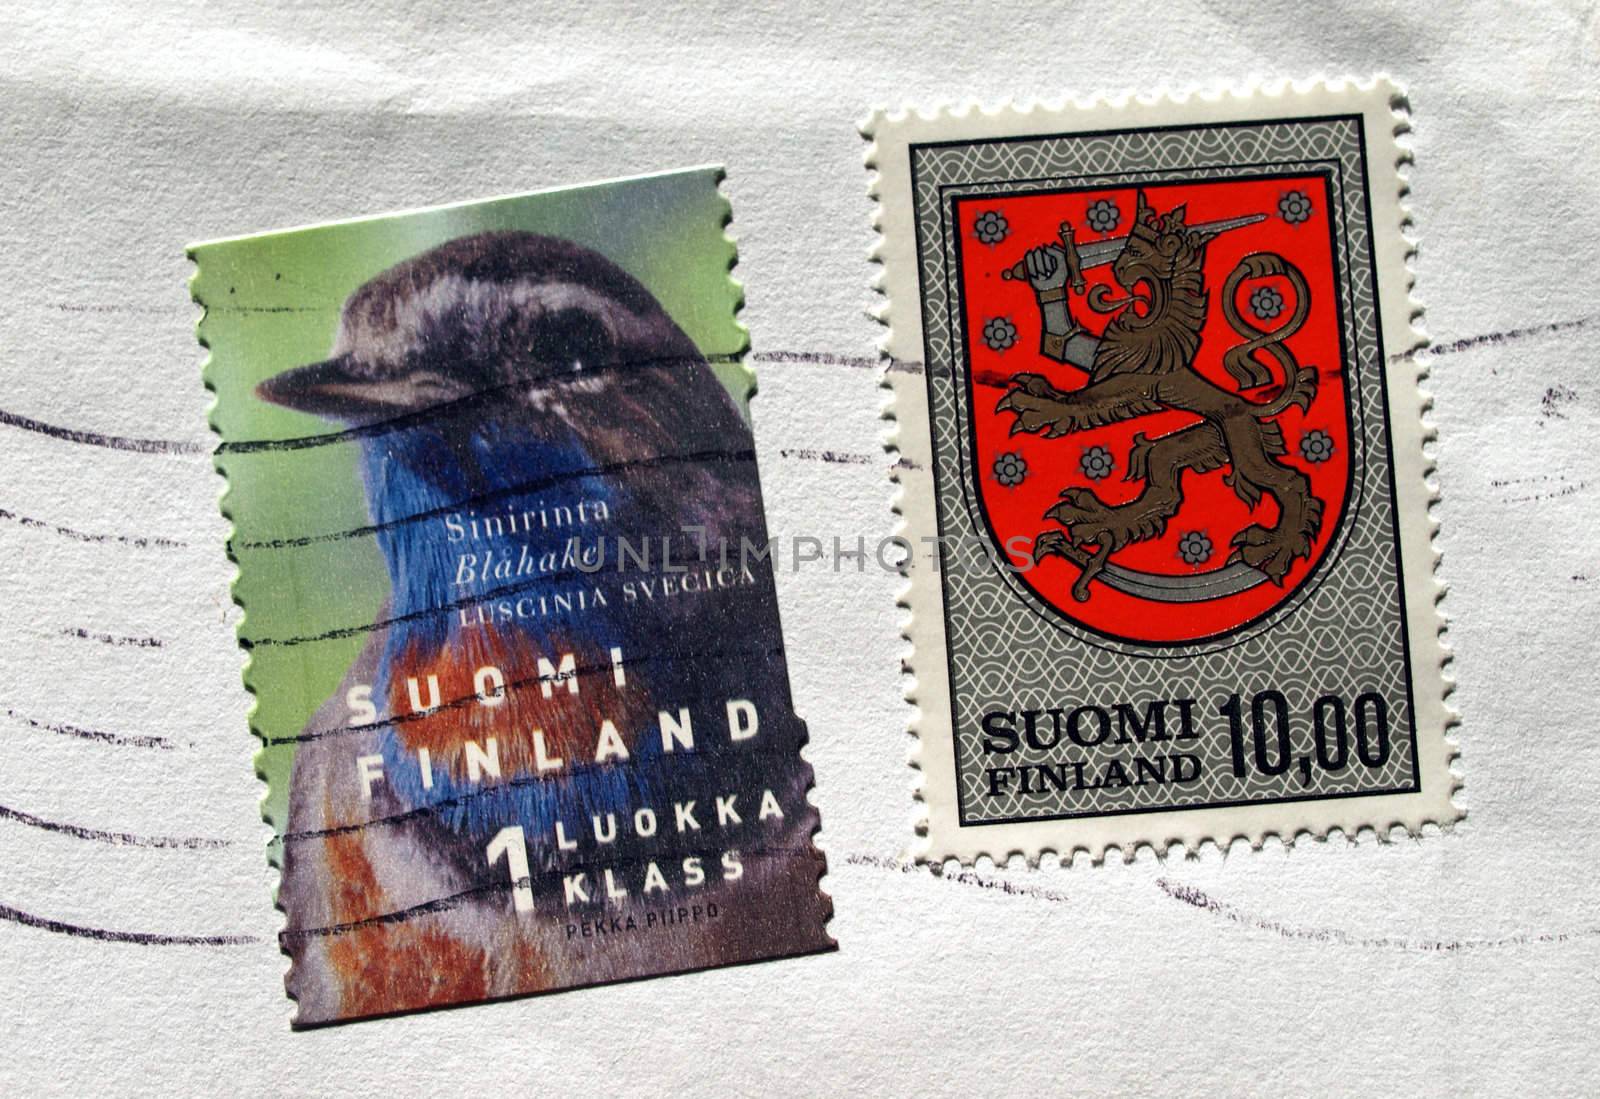 Finland stamp by paolo77